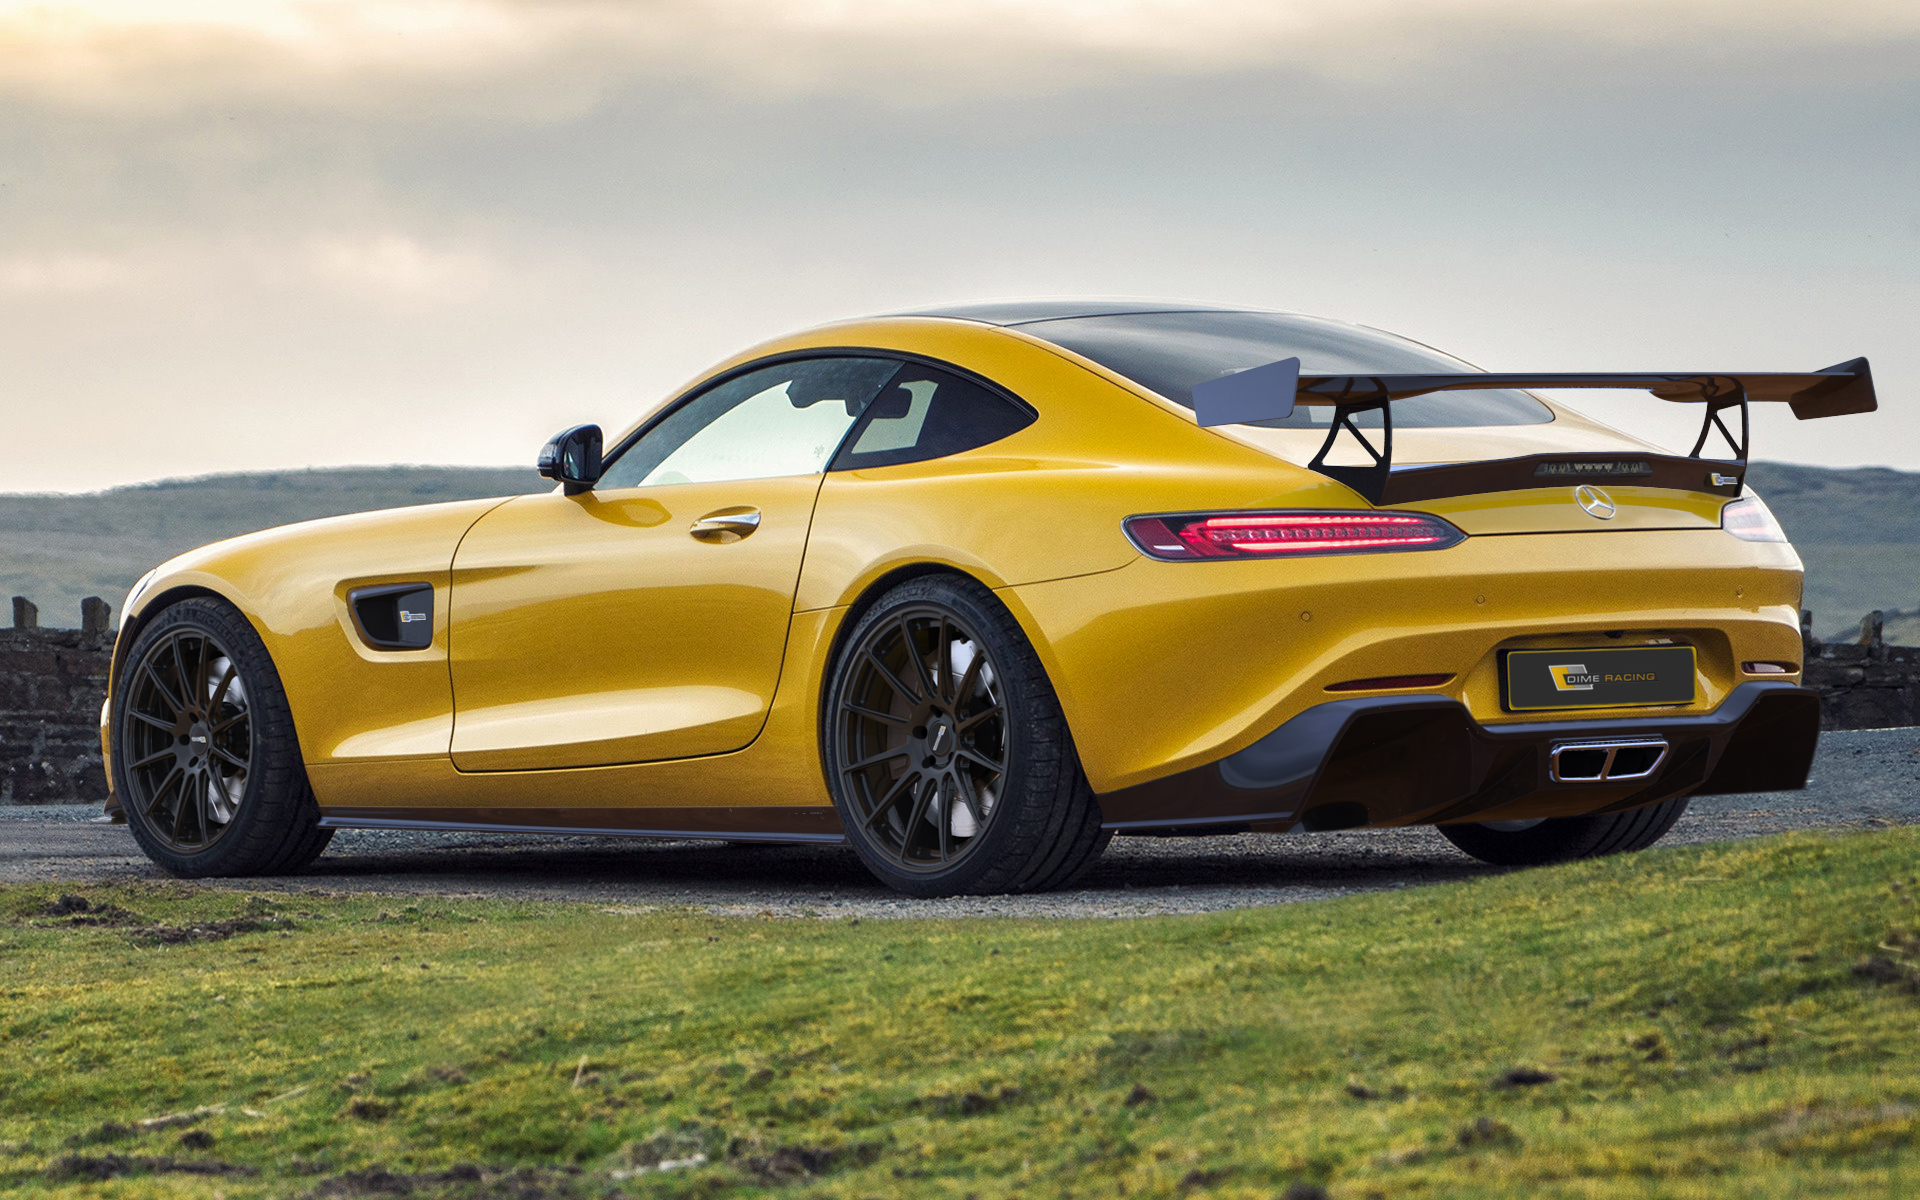 dime-racing-edition-amg-gt-introduction-rear3q